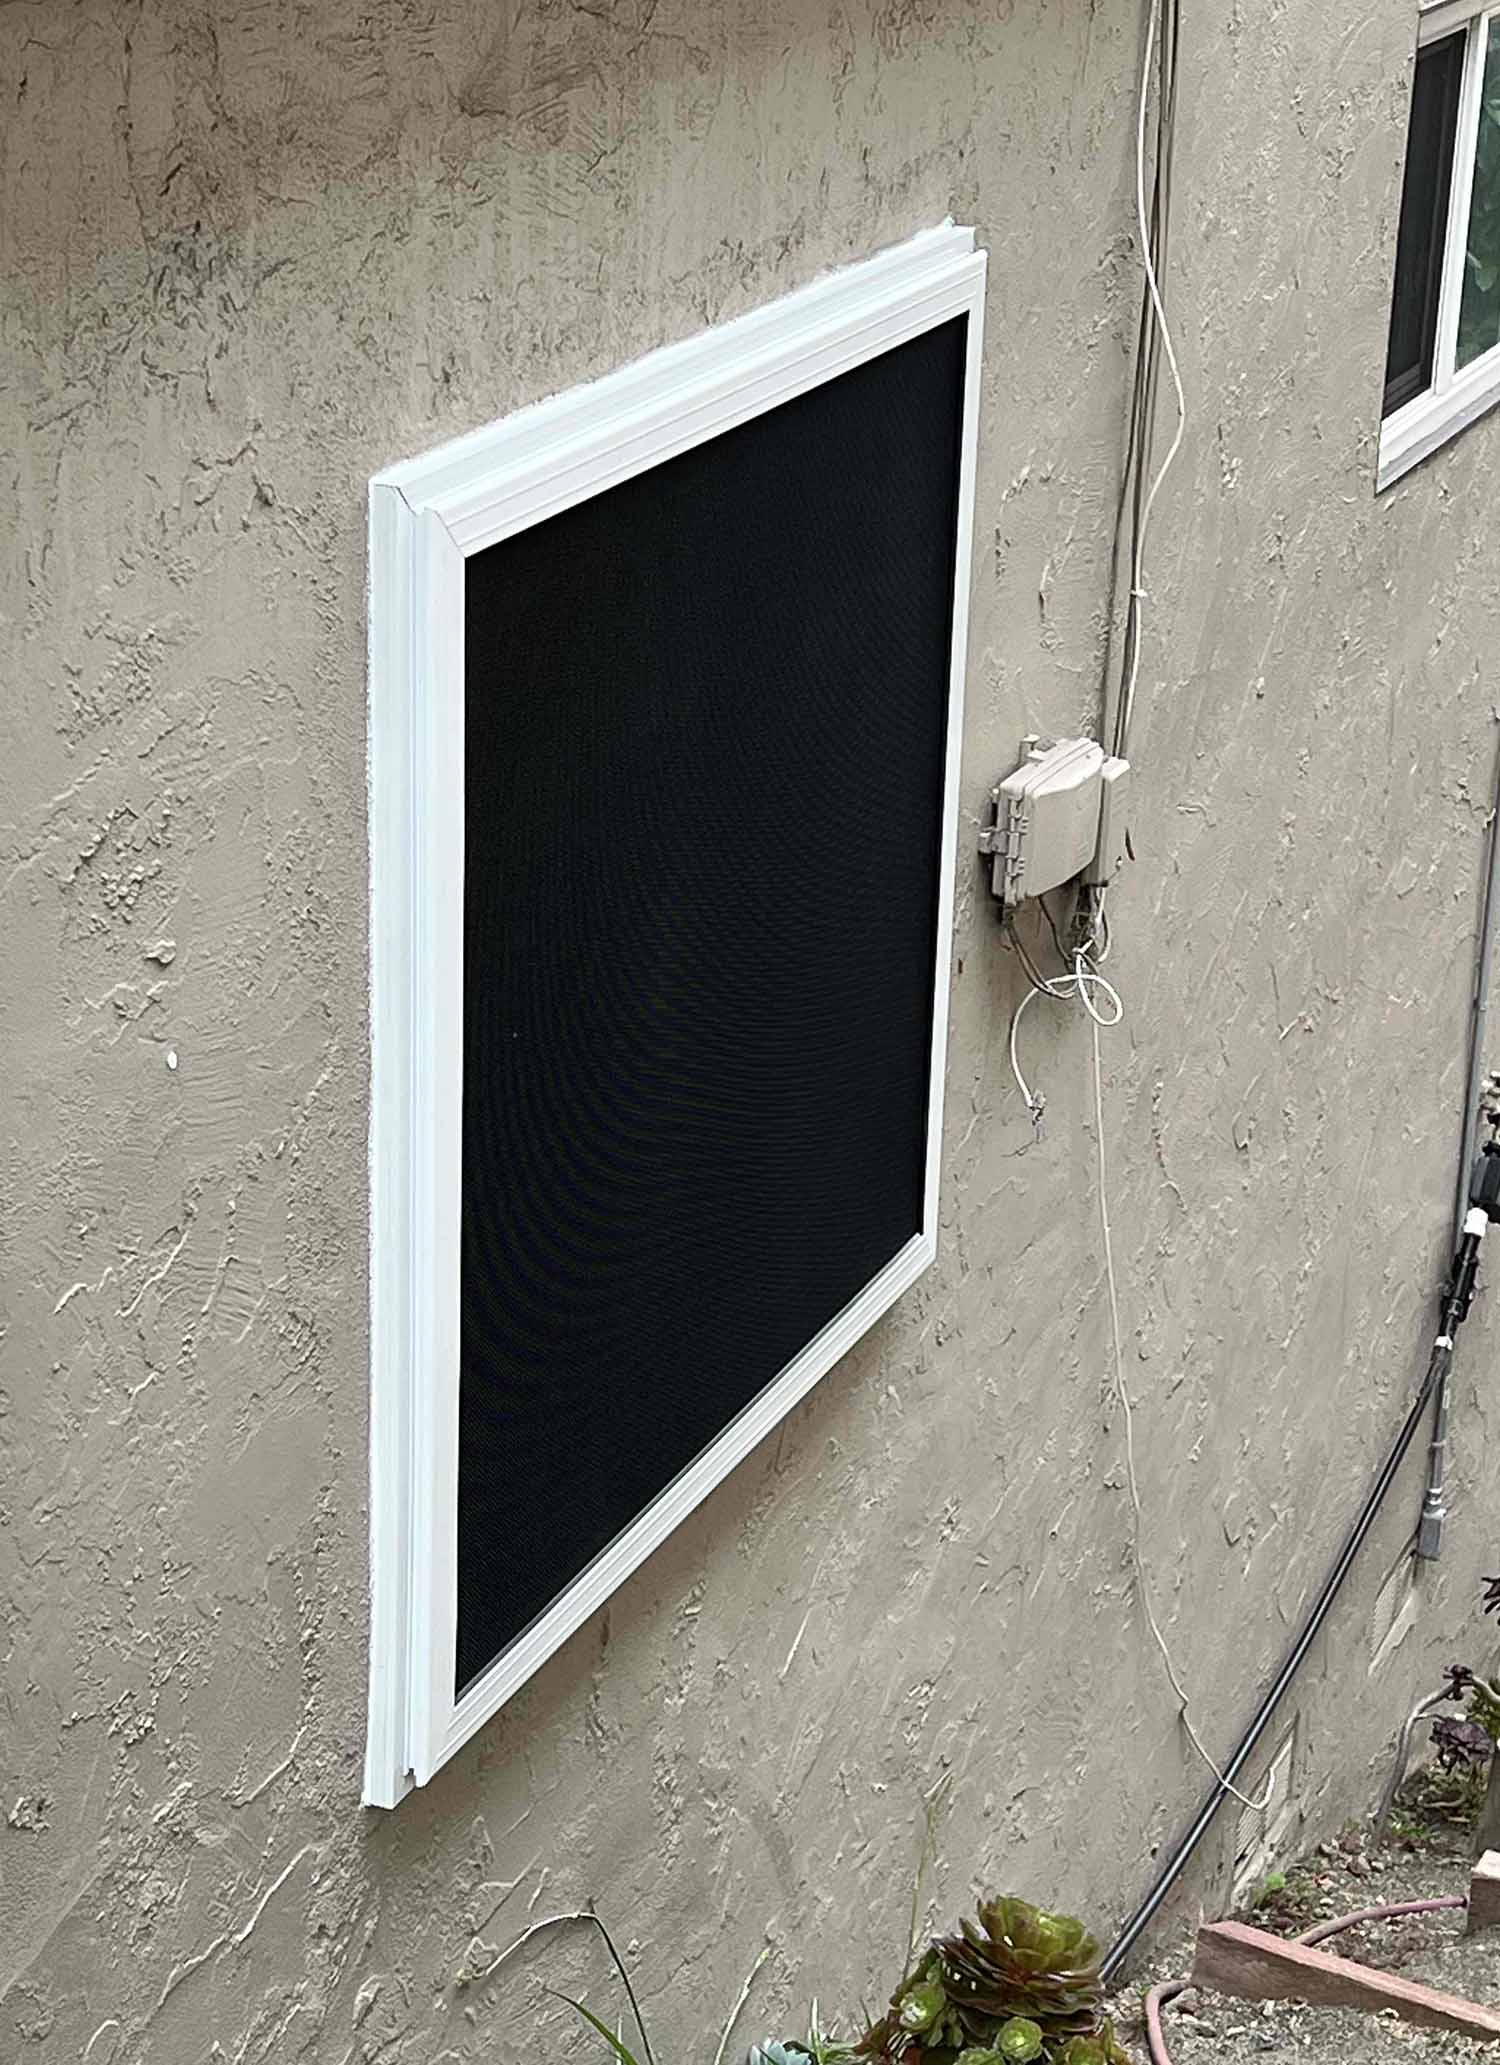 Add Crimsafe Security Screens to Your San Leandro Home. Installed by ClimatePro.